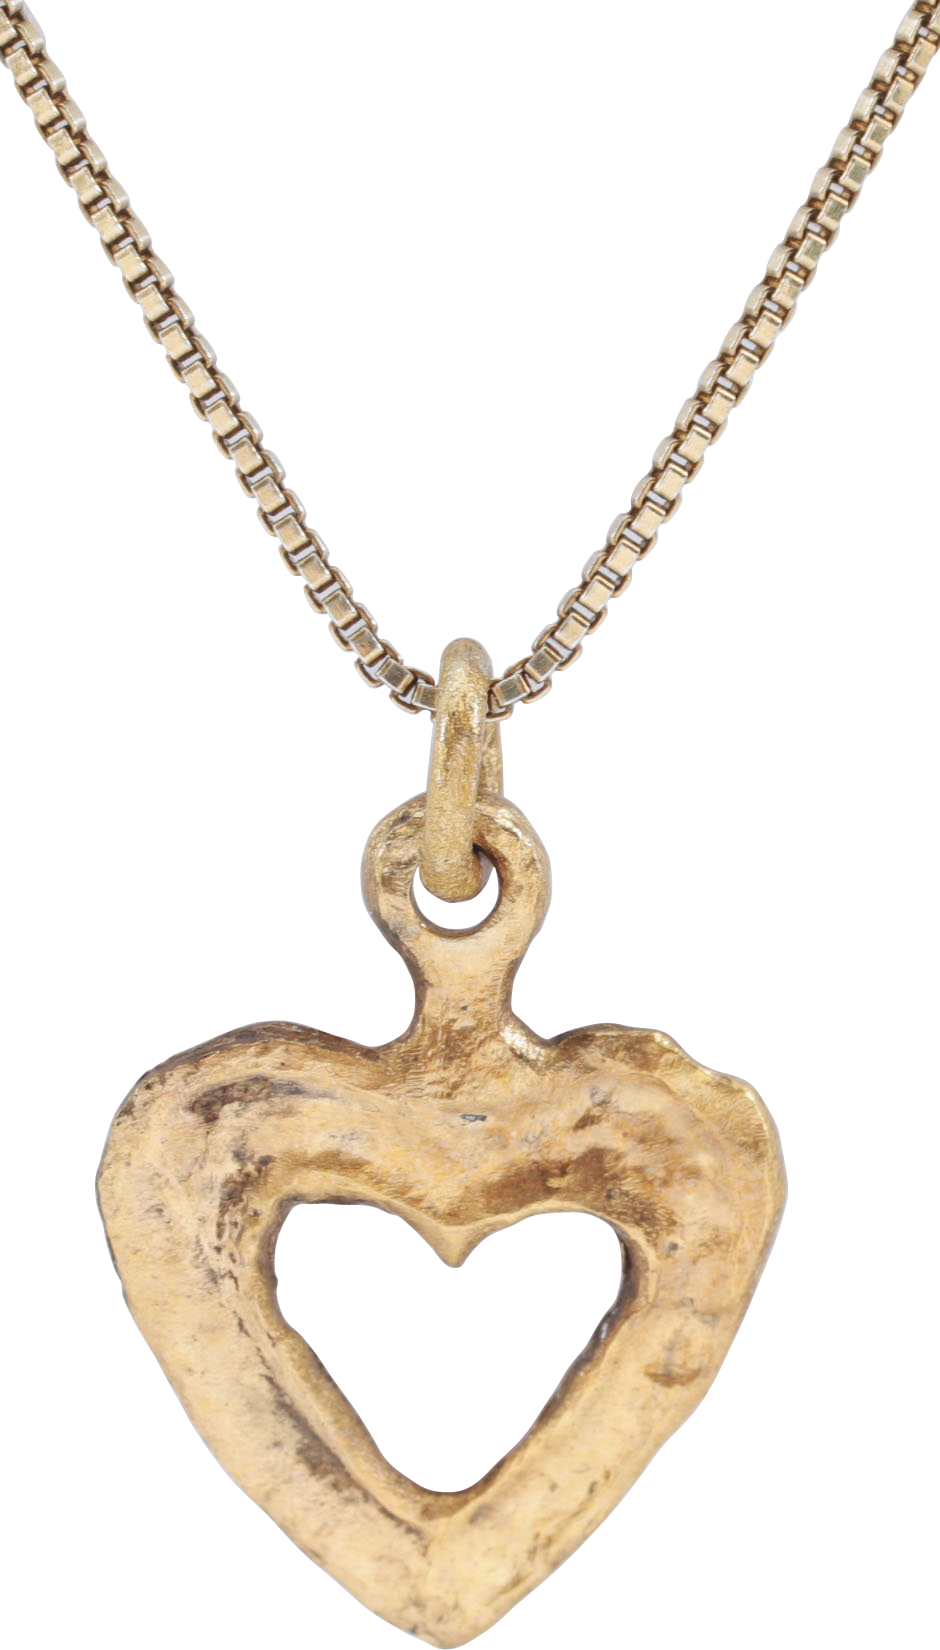 ANCIENT VIKING HEART PENDANT NECKLACE, 866-1067 AD - Picardi Jewelry